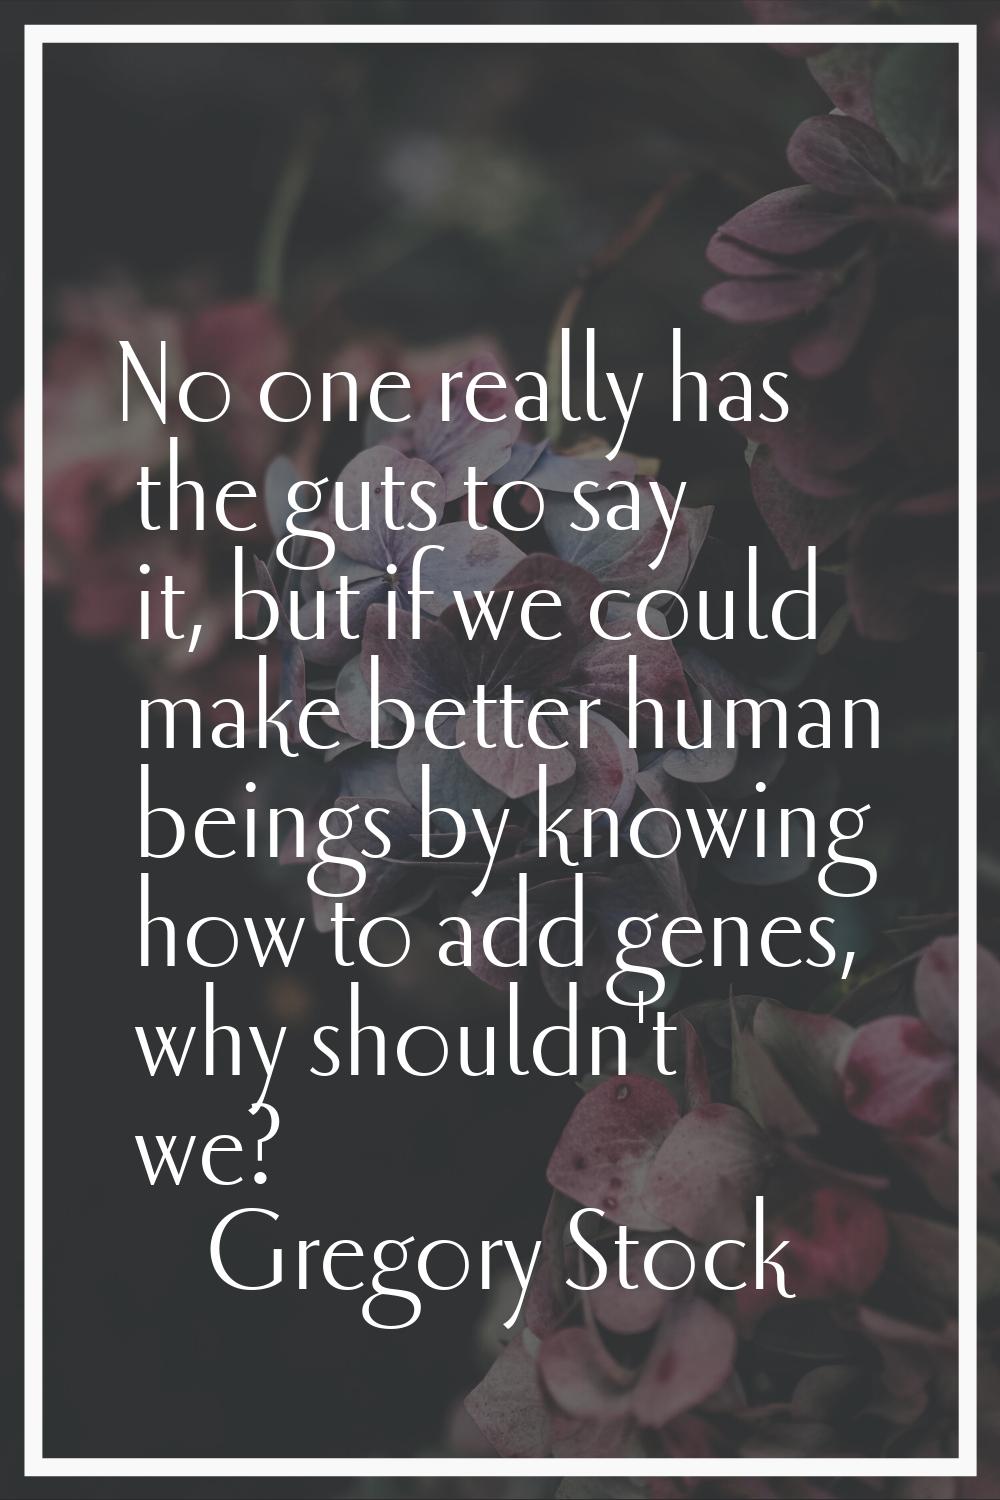 No one really has the guts to say it, but if we could make better human beings by knowing how to ad